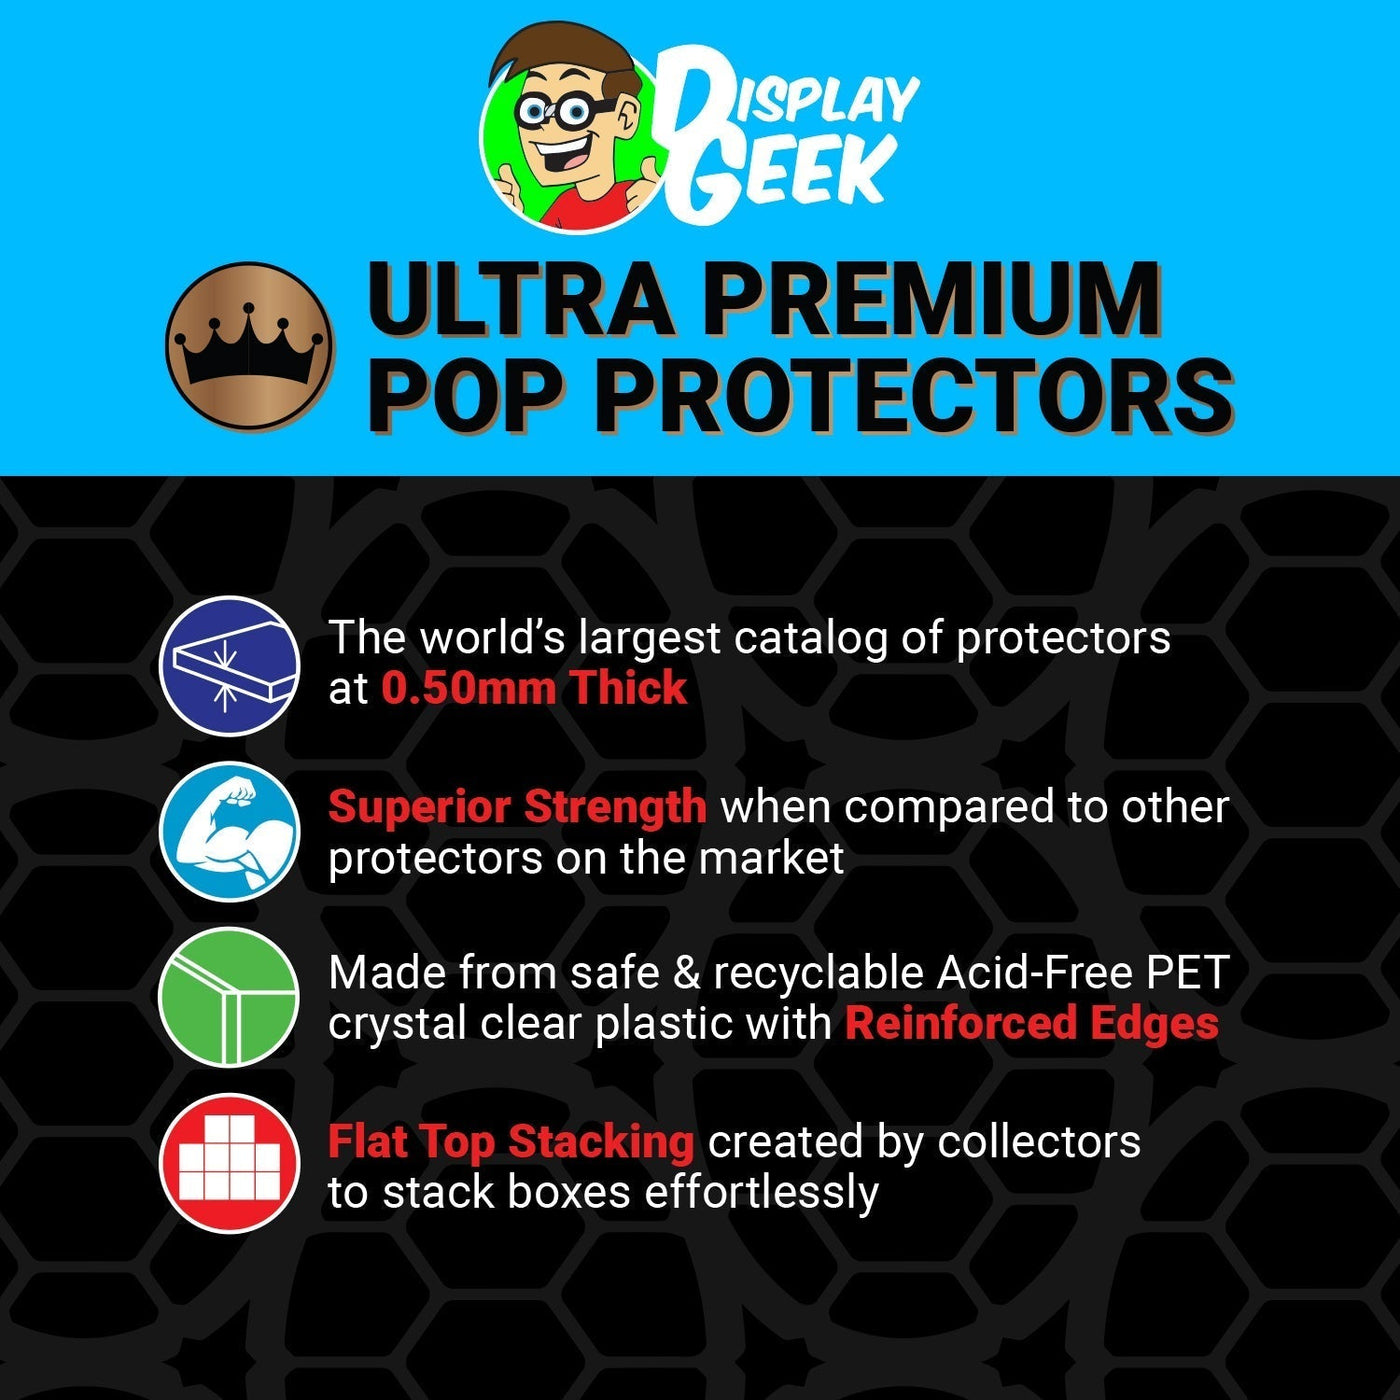 Pop Protector for Aurora with Castle #29 Funko Pop Town on The Protector Guide App by Display Geek